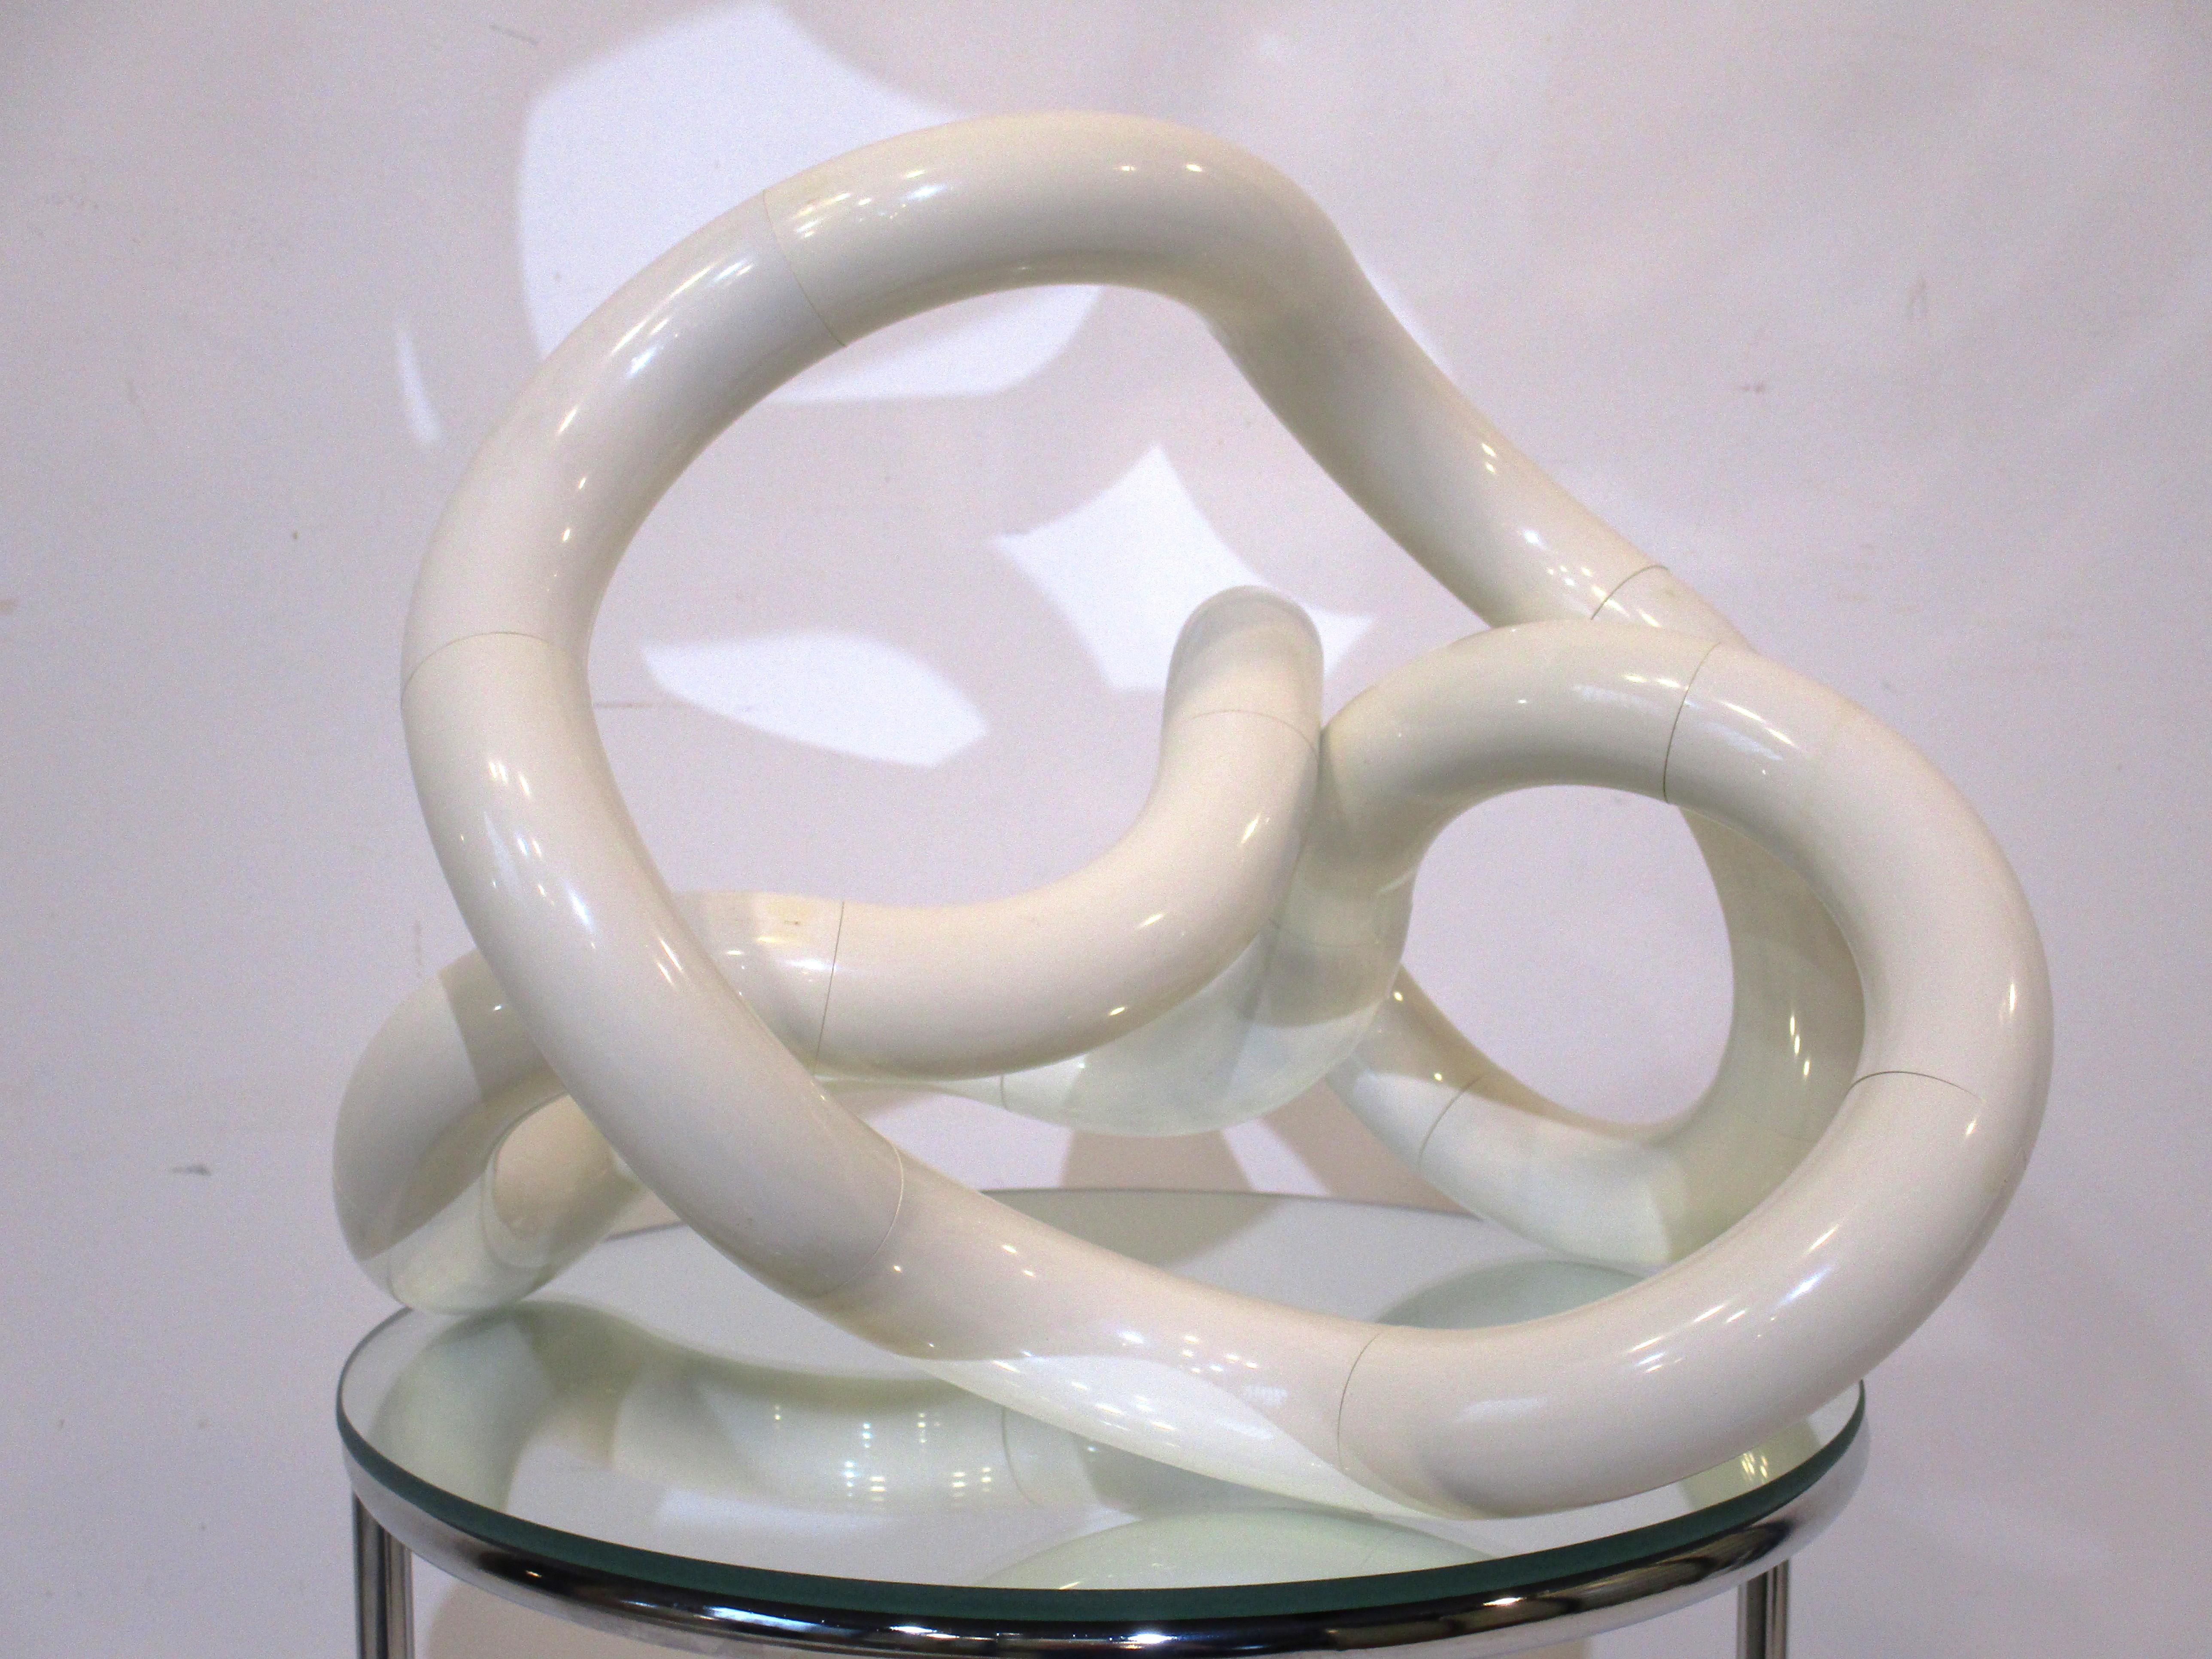 A off white poly resin articulating sculpture called the Tangle because it can be turned and twisted into many shapes looking tangled up . This well thought out piece was designed by Richard X Zawitz in 1980 and manufactured by Tangle Creations